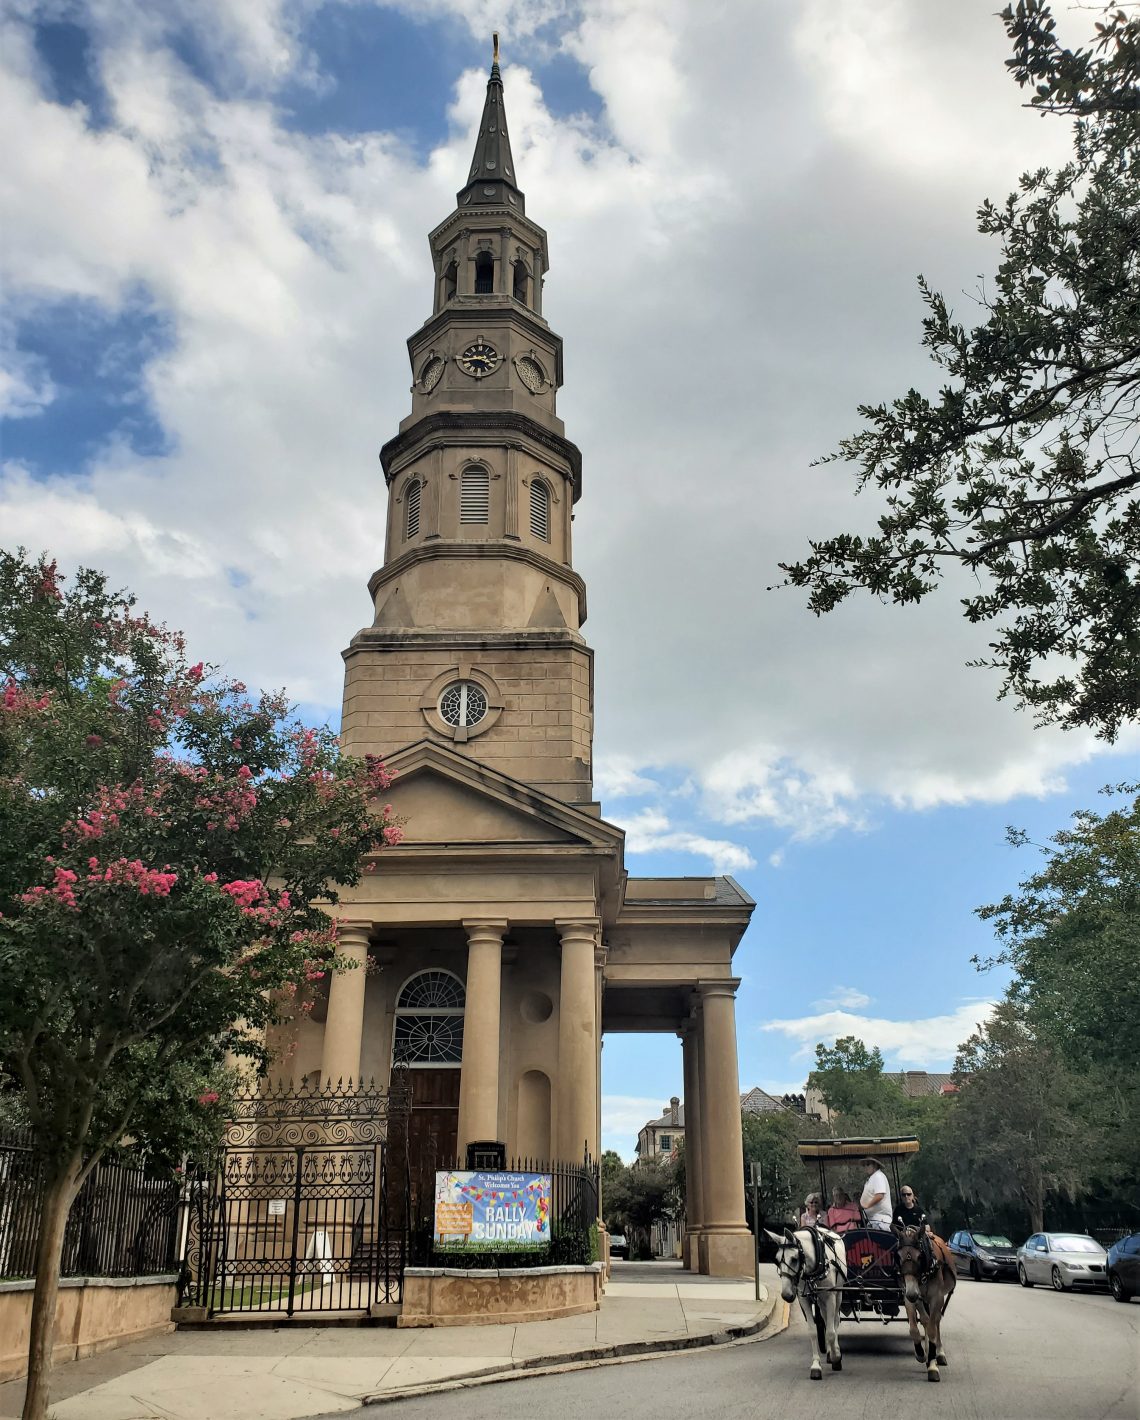 A classic view of St. Philip's and Church Street. Not only is the steeple beautiful, it one served as the last lighthouse in a range of lighthouses used to guide sailors into Charleston.